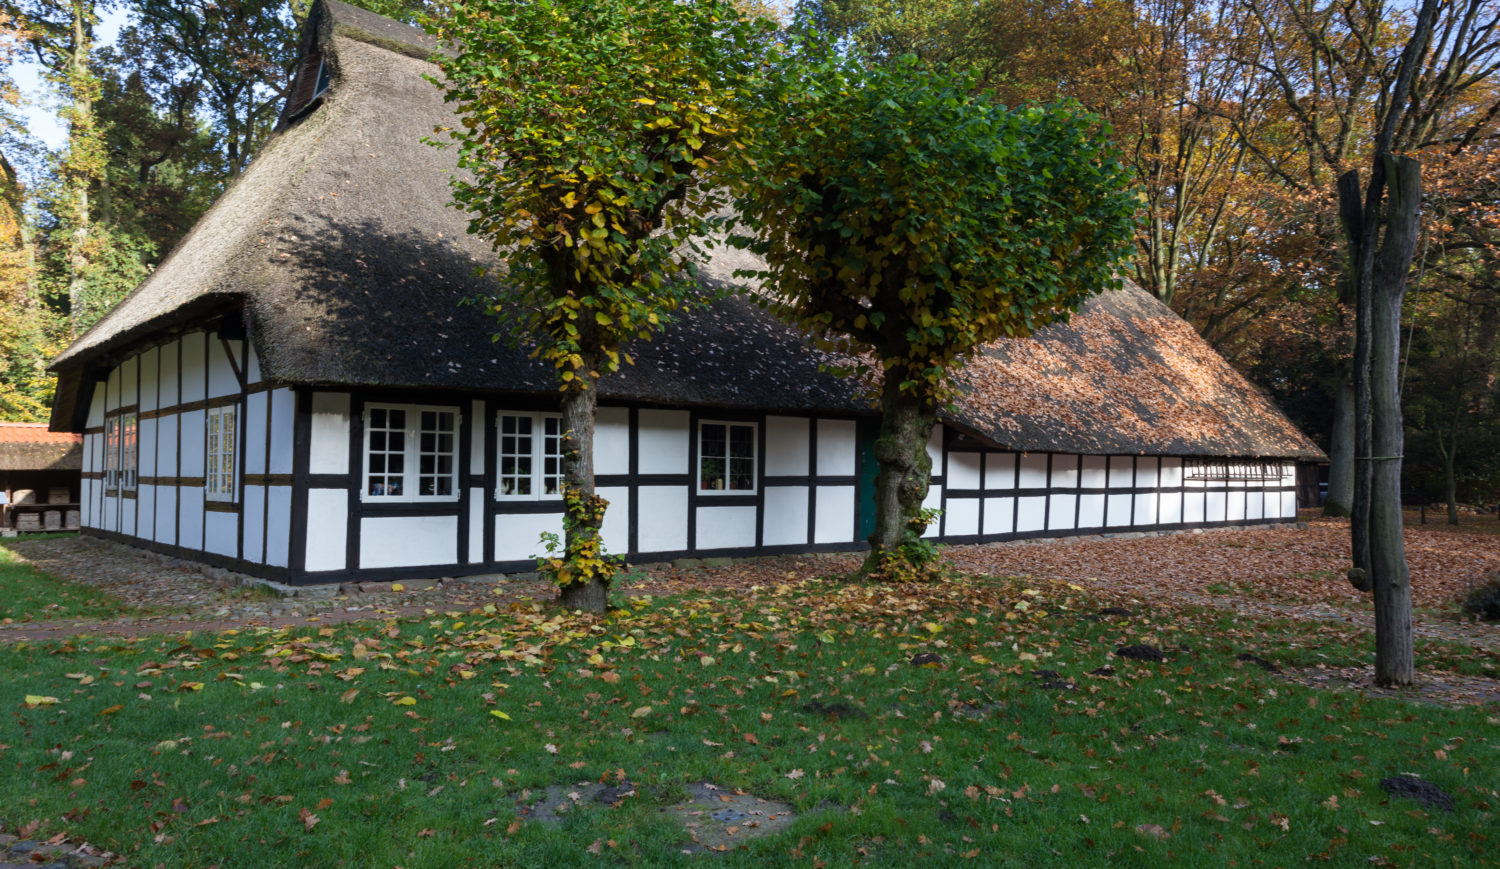 The marsh house is a replica of a house from the 17th century with agriculturally